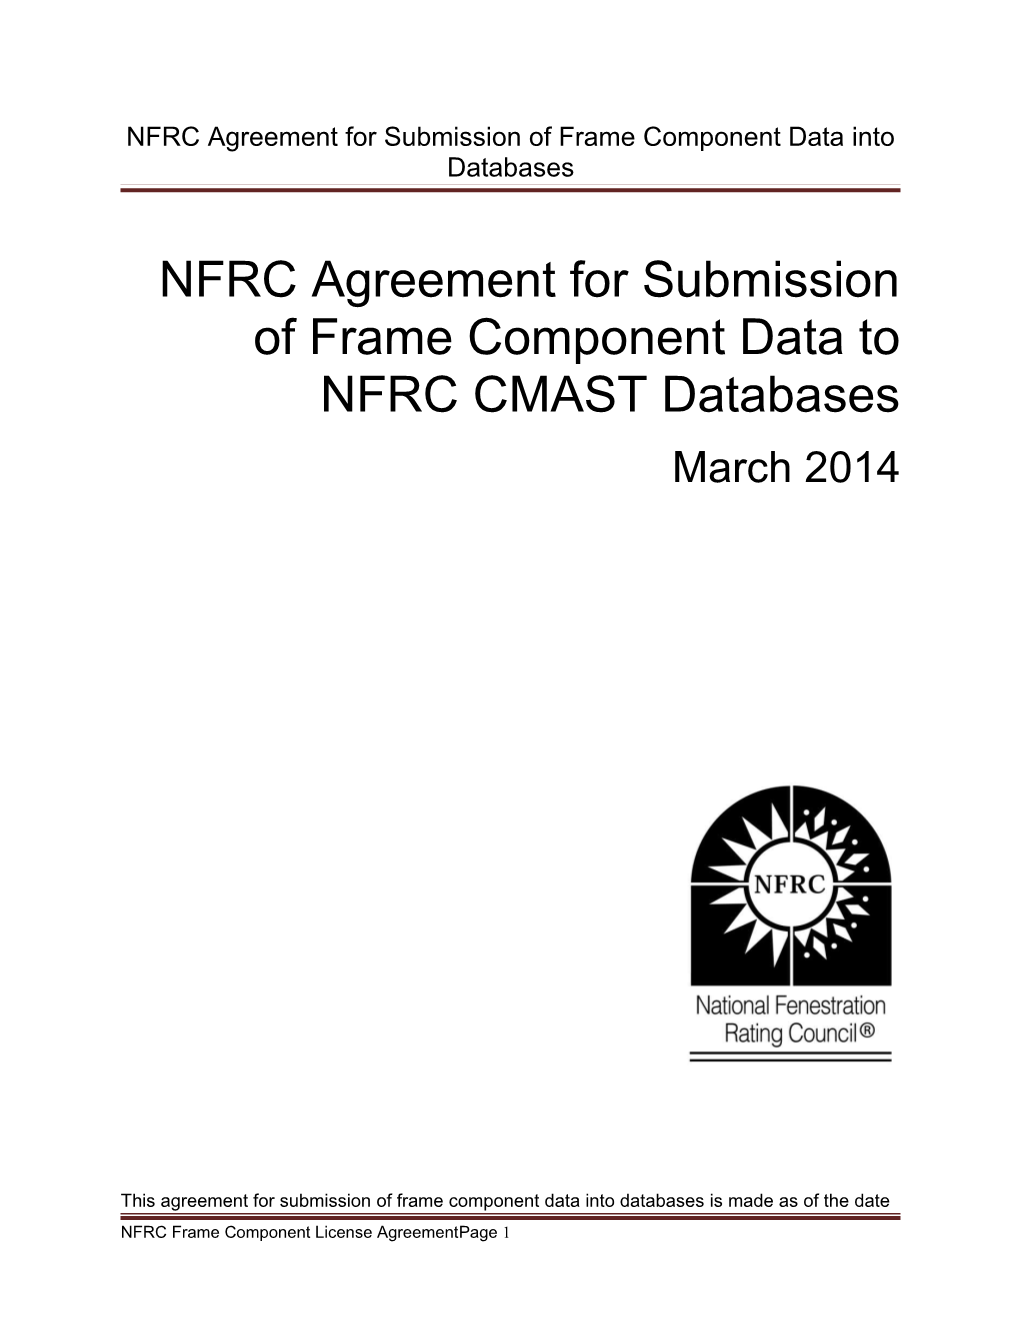 NFRC Agreement for Submission of Frame Component Data Into Databases